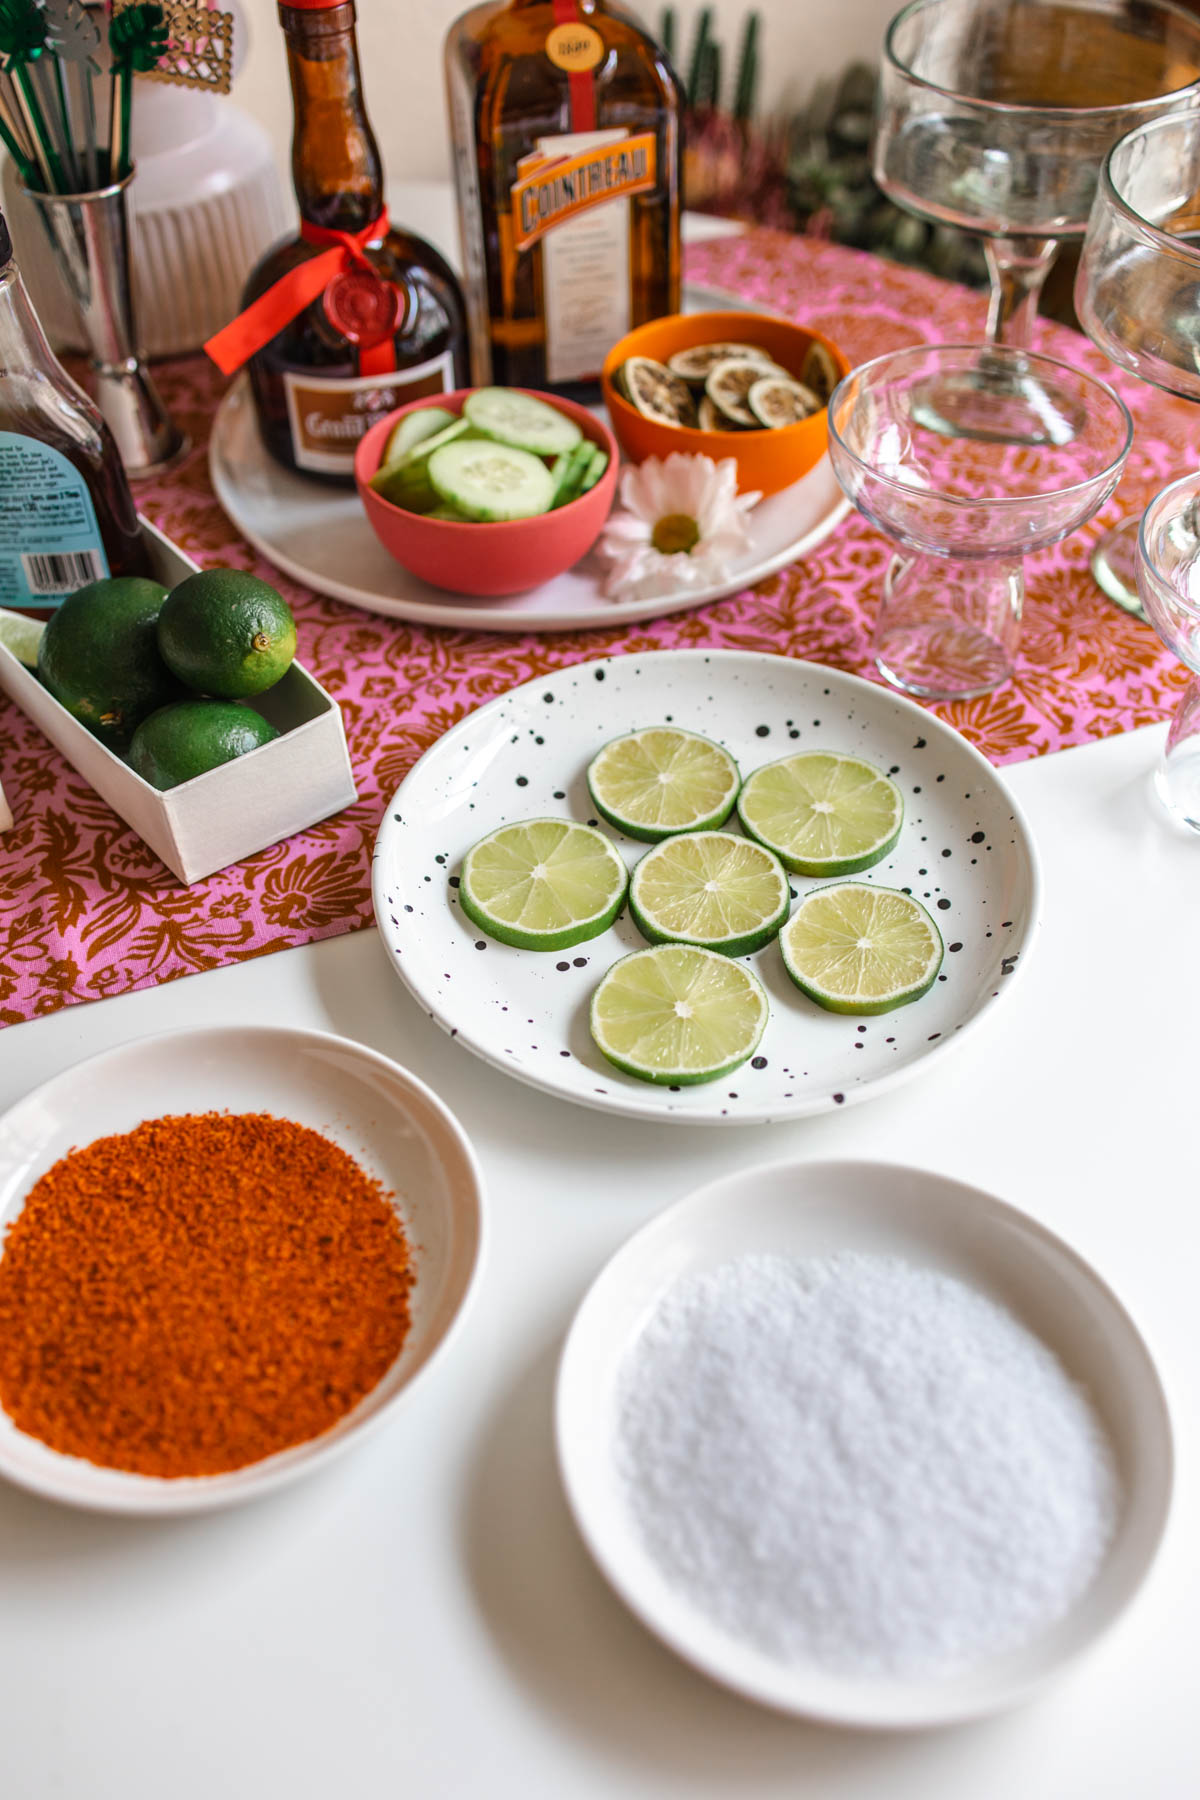 Plates of salt, Tajin, and sliced limes in front of bottles of orange liqueurs and bowls of cucumber slices and dried lime wheels.